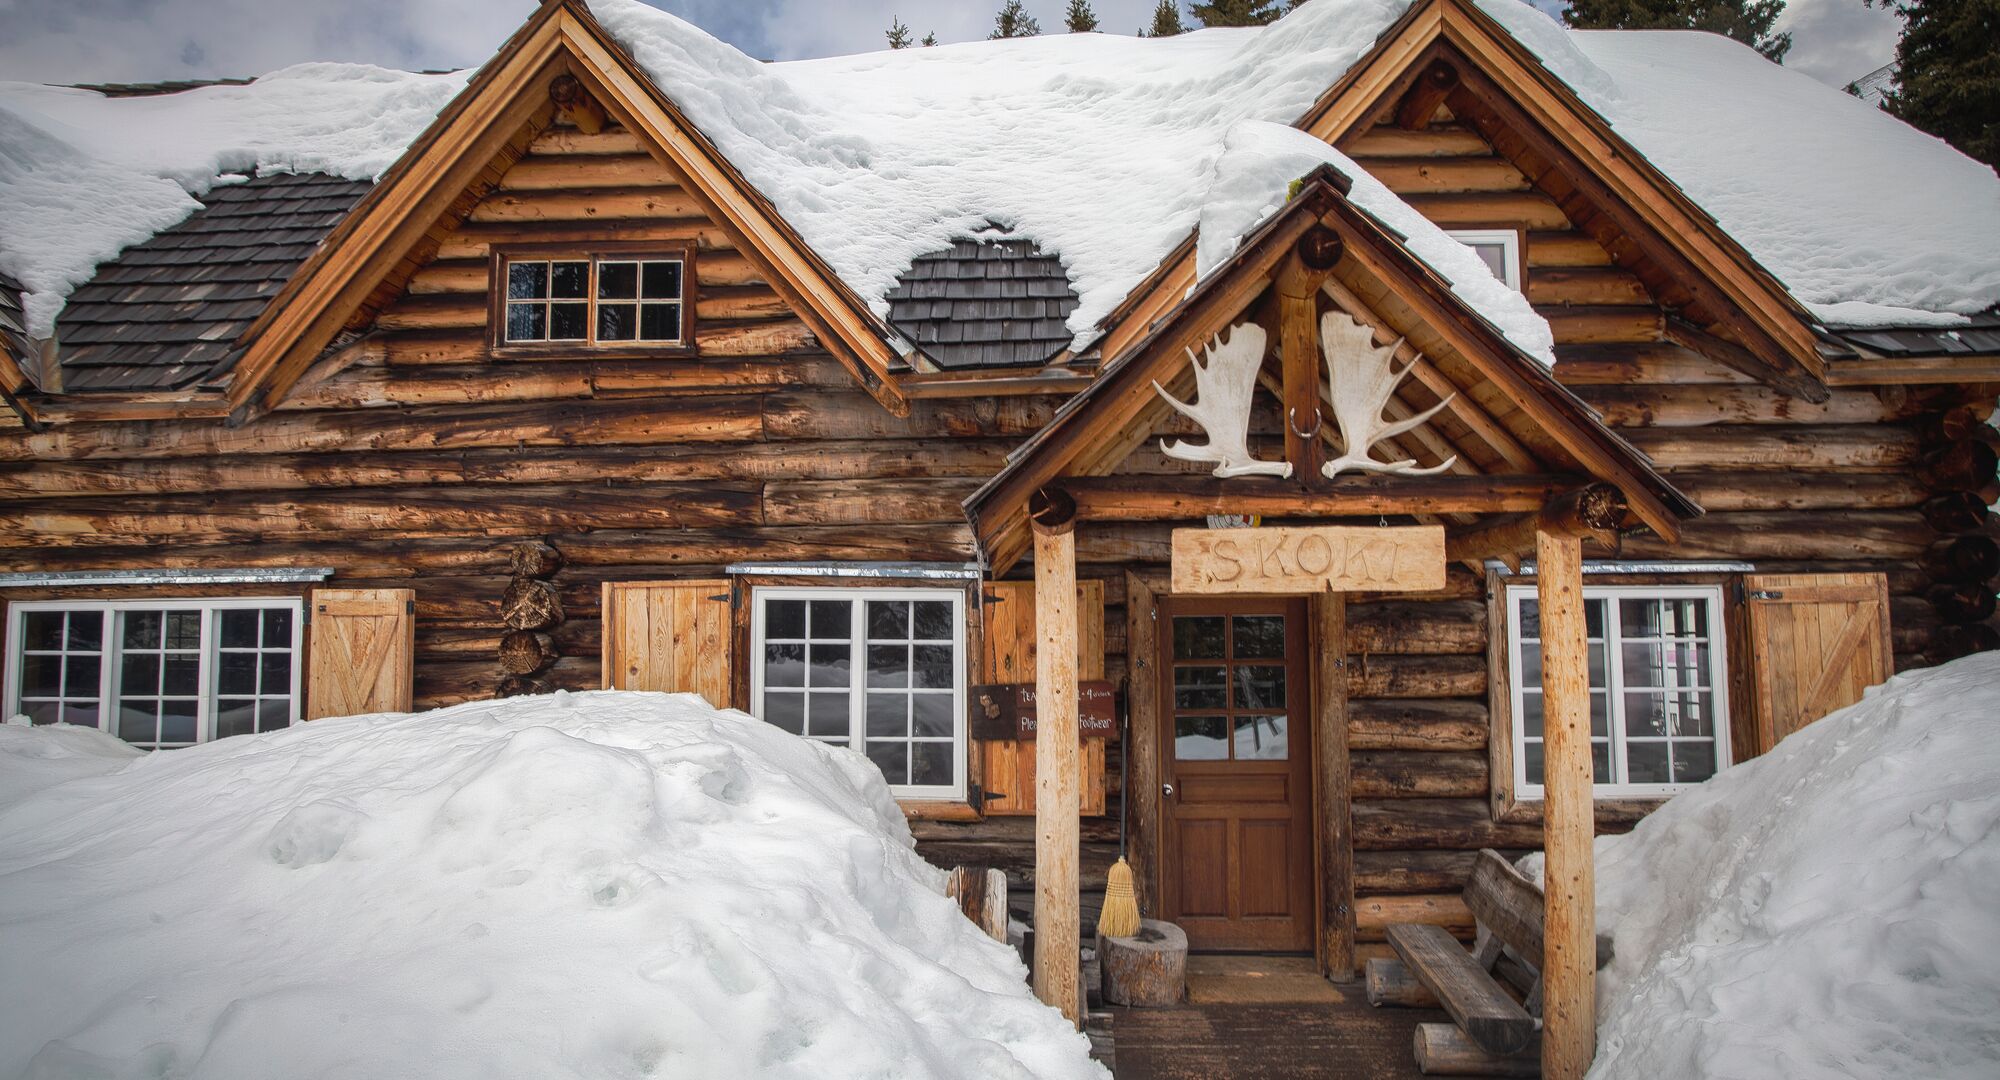 Backcountry Lodges in Winter